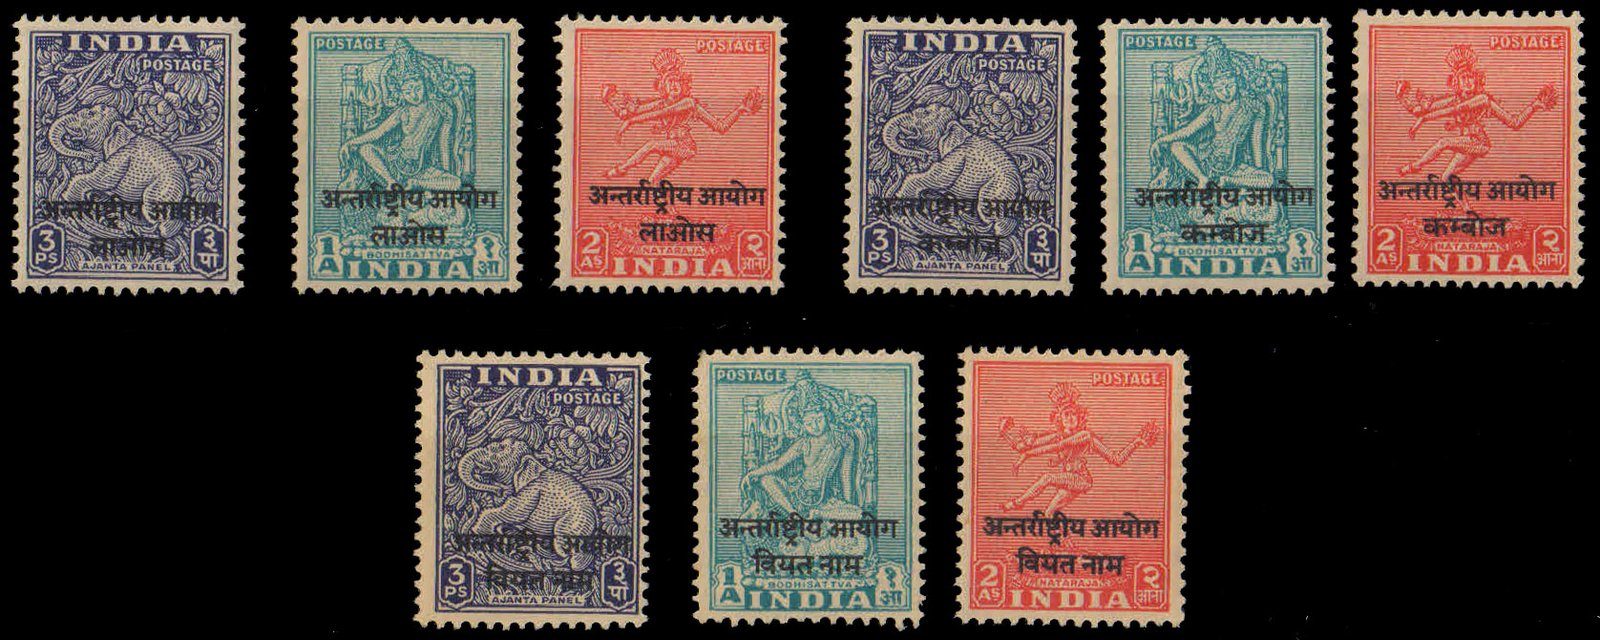 1954 Indian forces in Indio China overprinted on Archeological series short set of 9 stamps, Cat � 9, Mint Never Hinged 